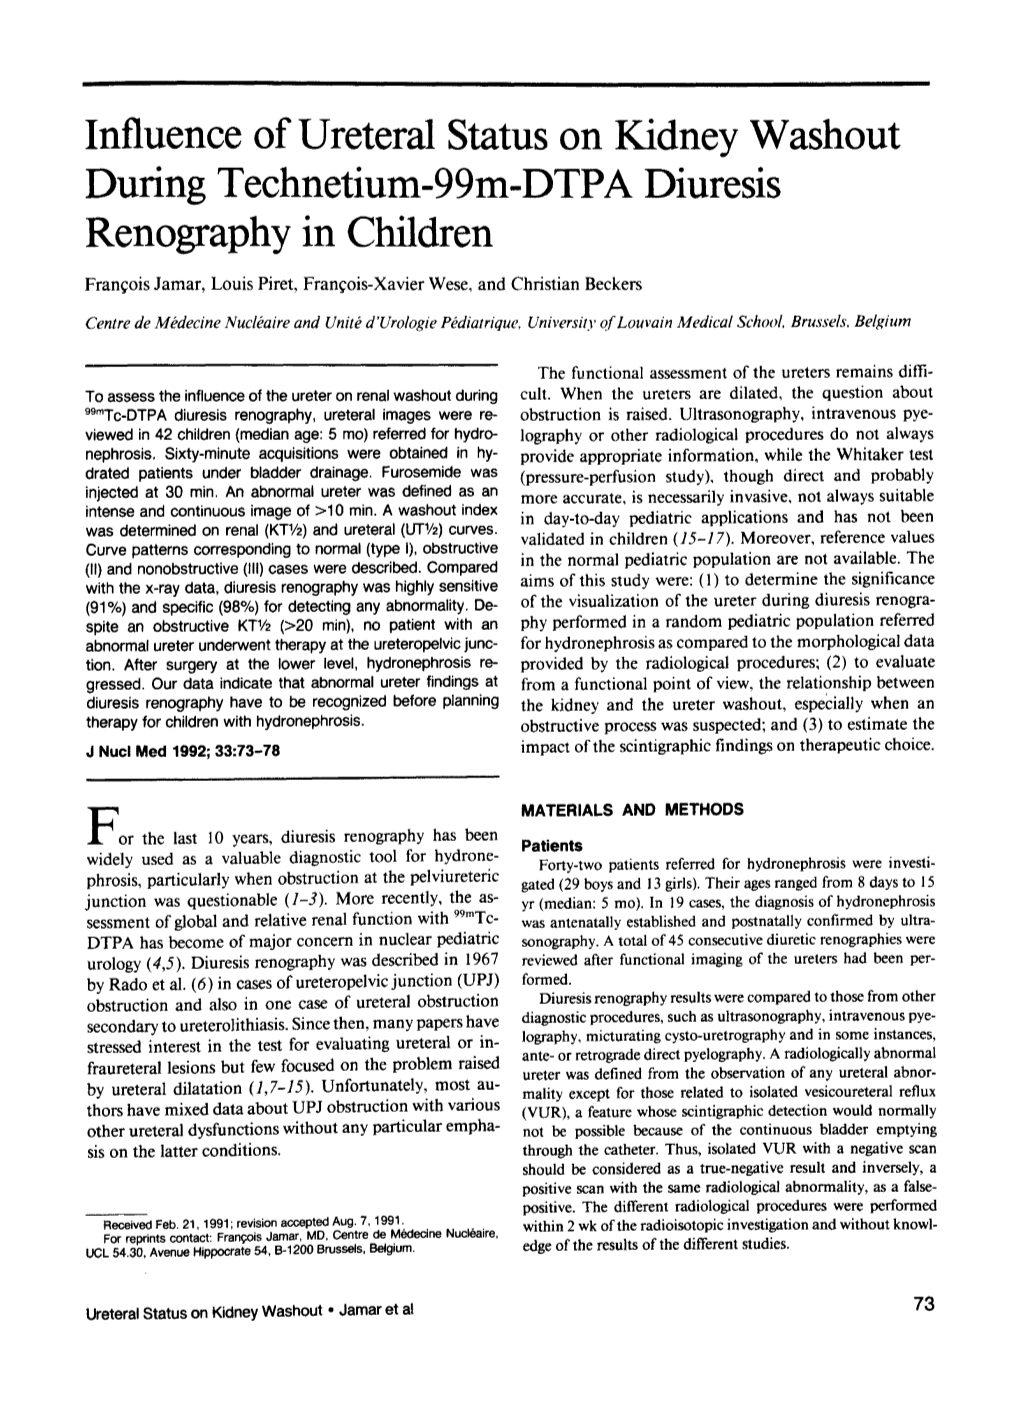 Influence of Ureteral Status on Kidney Washout During Technetium-99M-DTPA Diuresis Renography in Children